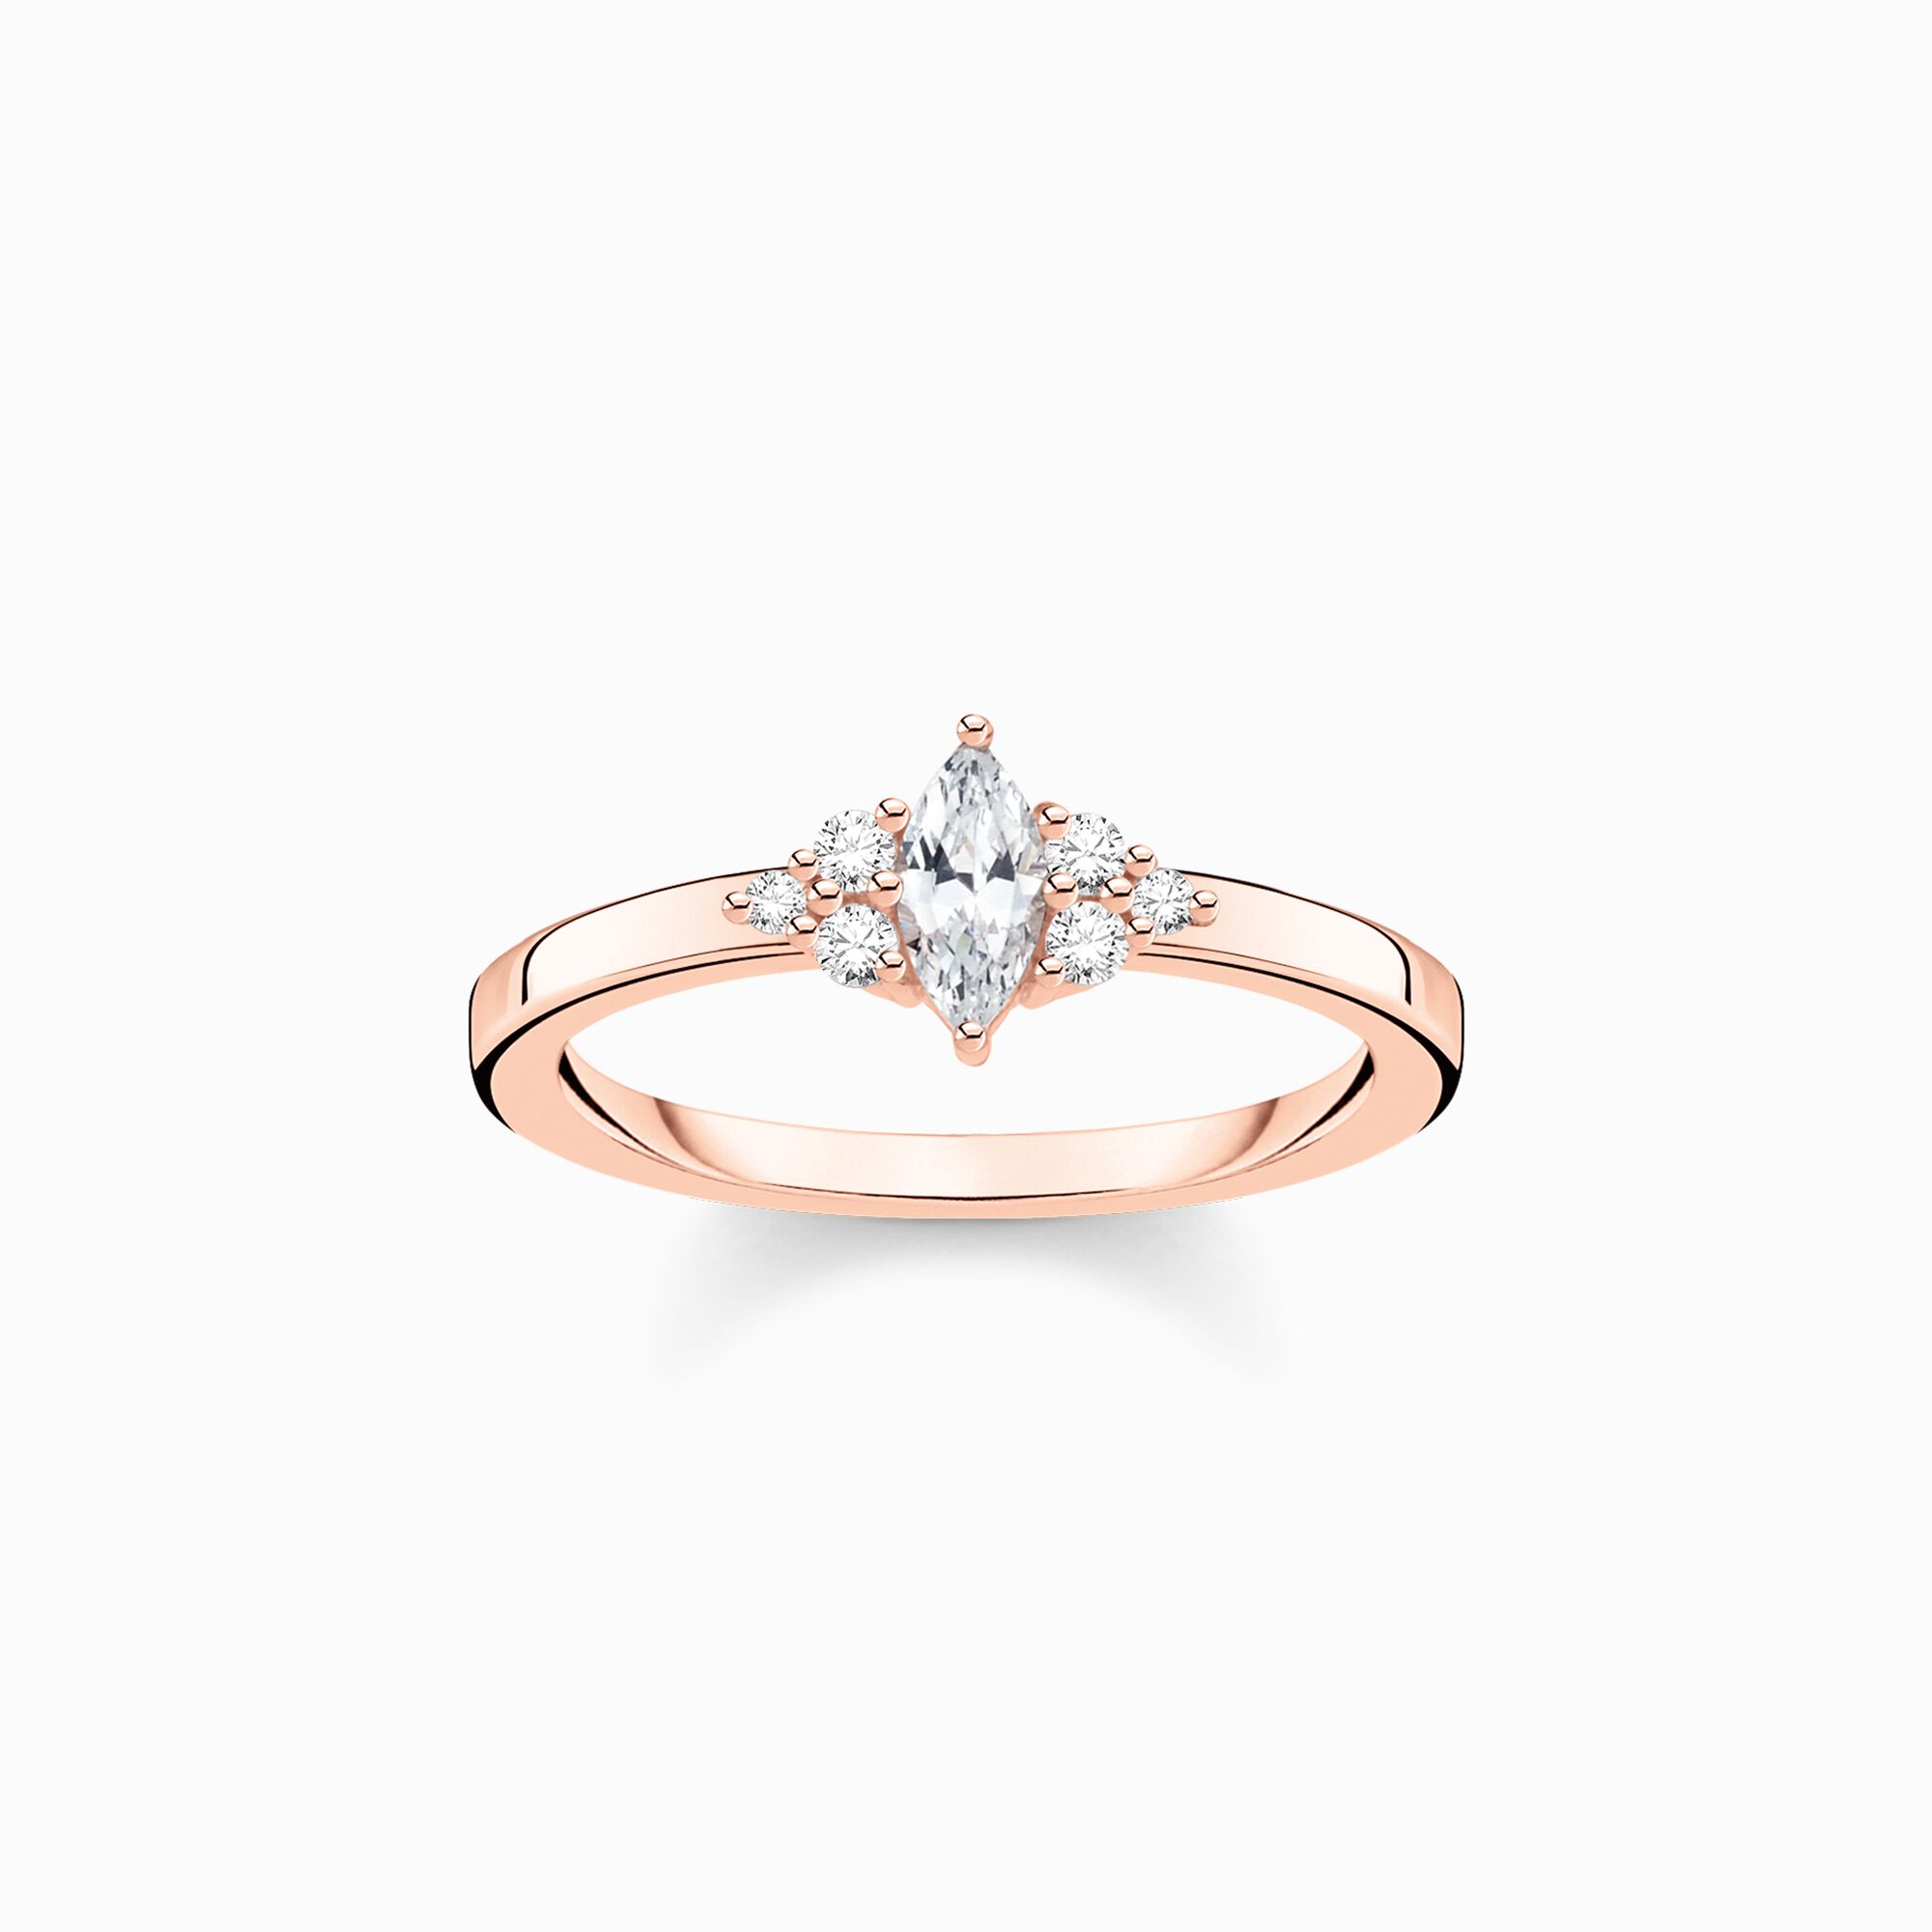 Ring vintage white stones rose gold from the Charming Collection collection in the THOMAS SABO online store